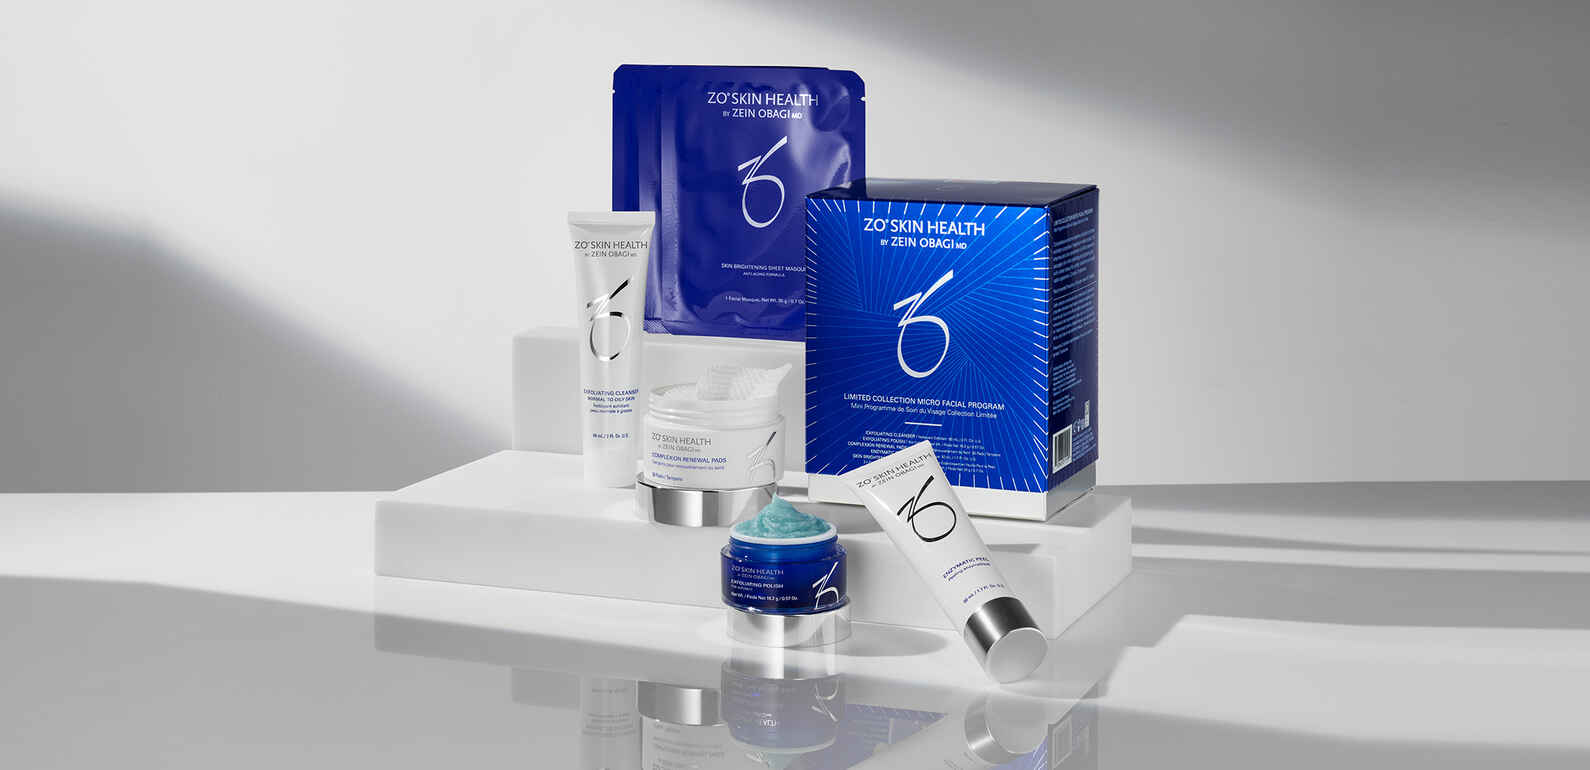 zo skin health product display on a glass table